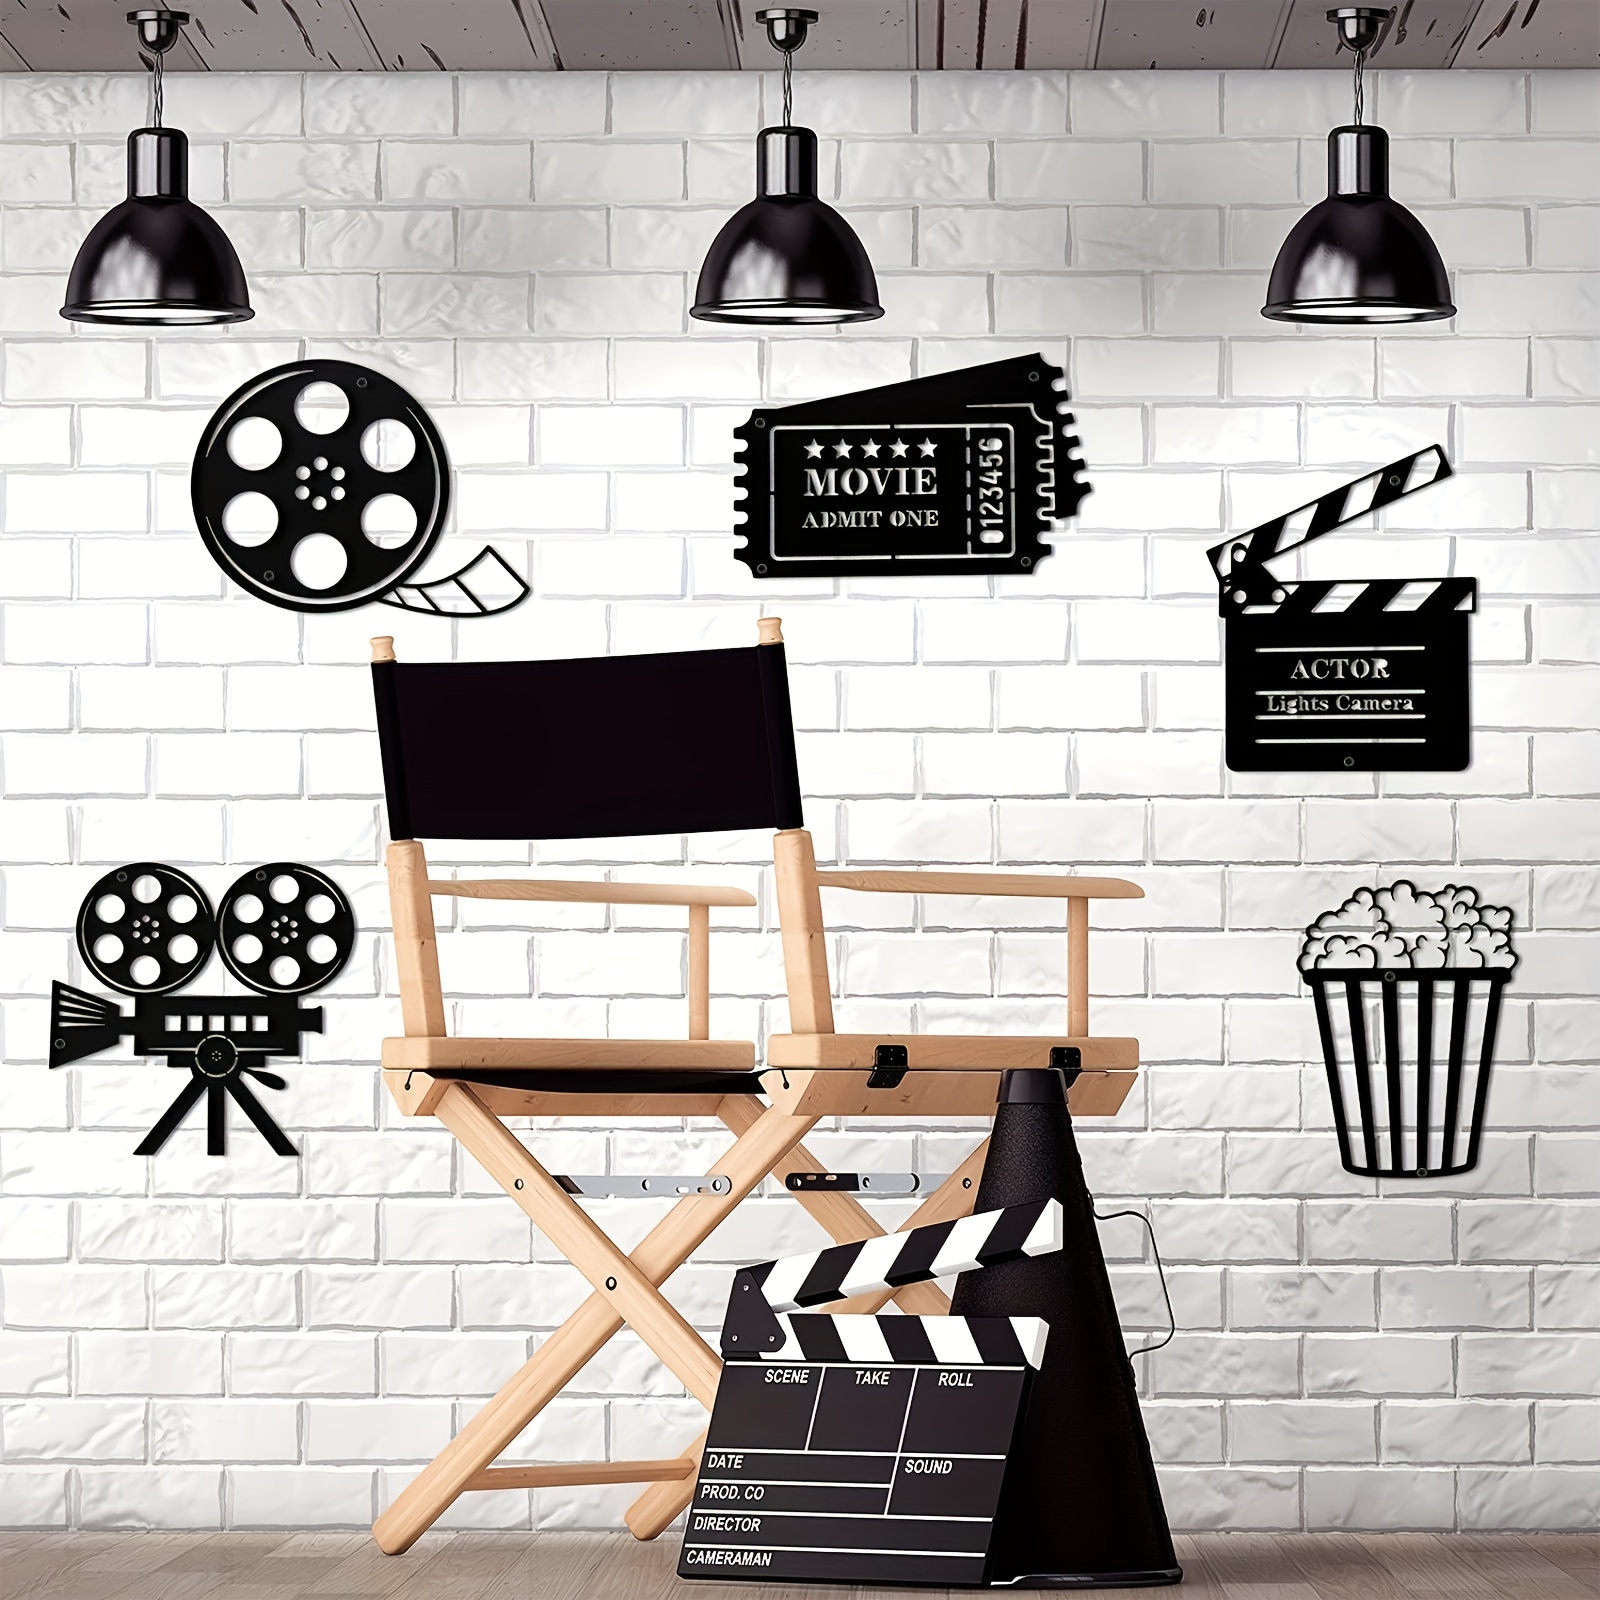 Movie Prop Film Strip Wall Decal Removable Wall Sticker Movie Room wall  decor Home Theater wall art mural HJ595